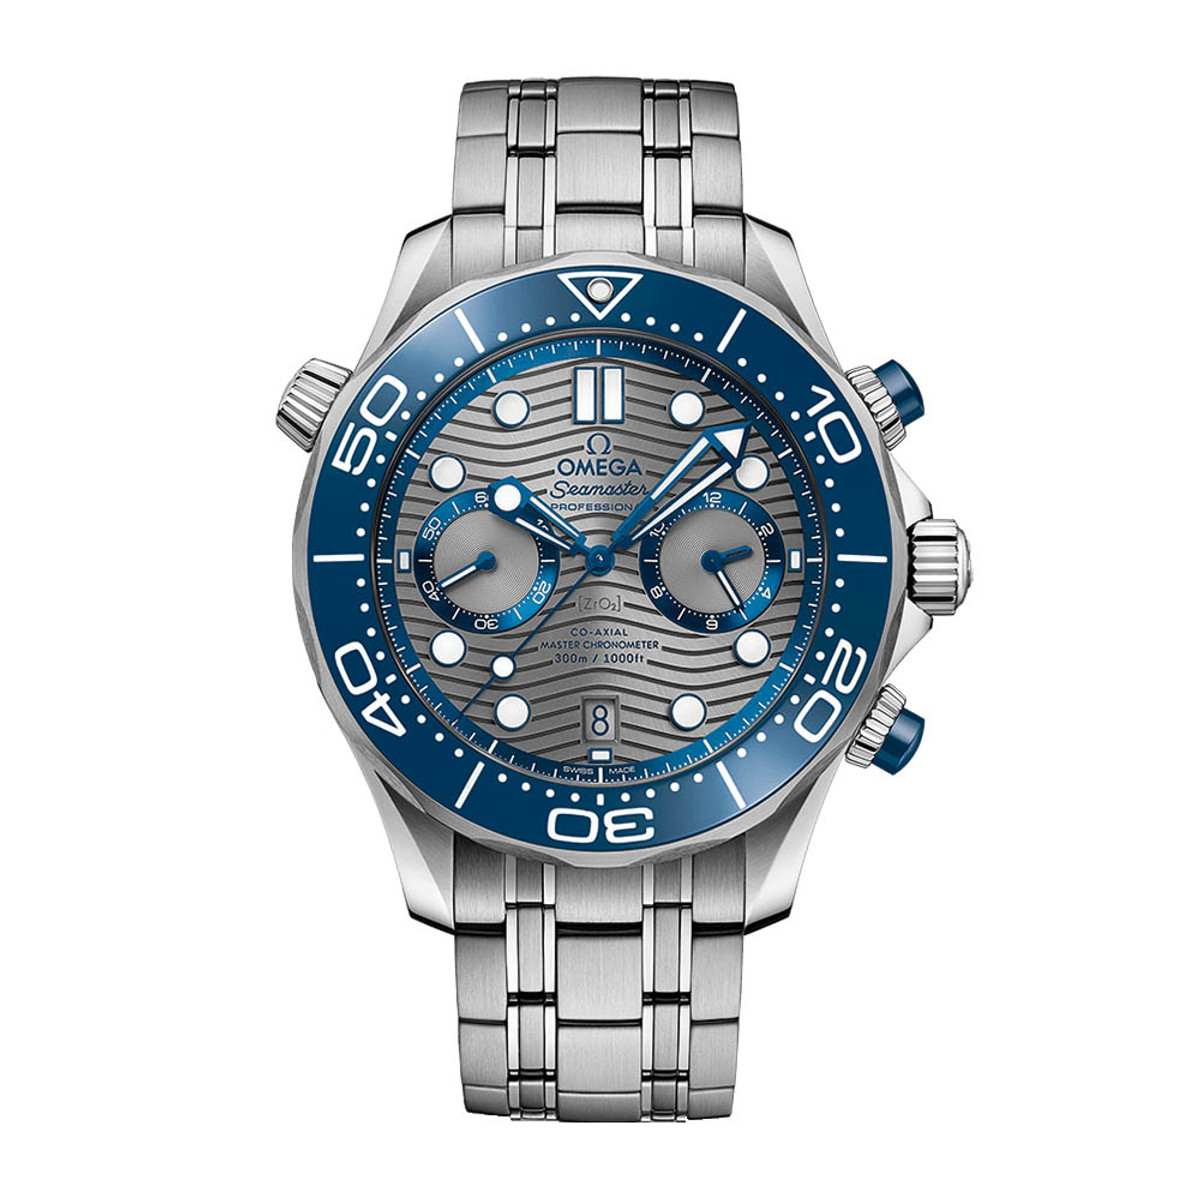 Omega Seamaster Diver 300M Chronograph 44mm 210.30.44.51.06.001-WOMG0896 Product Image